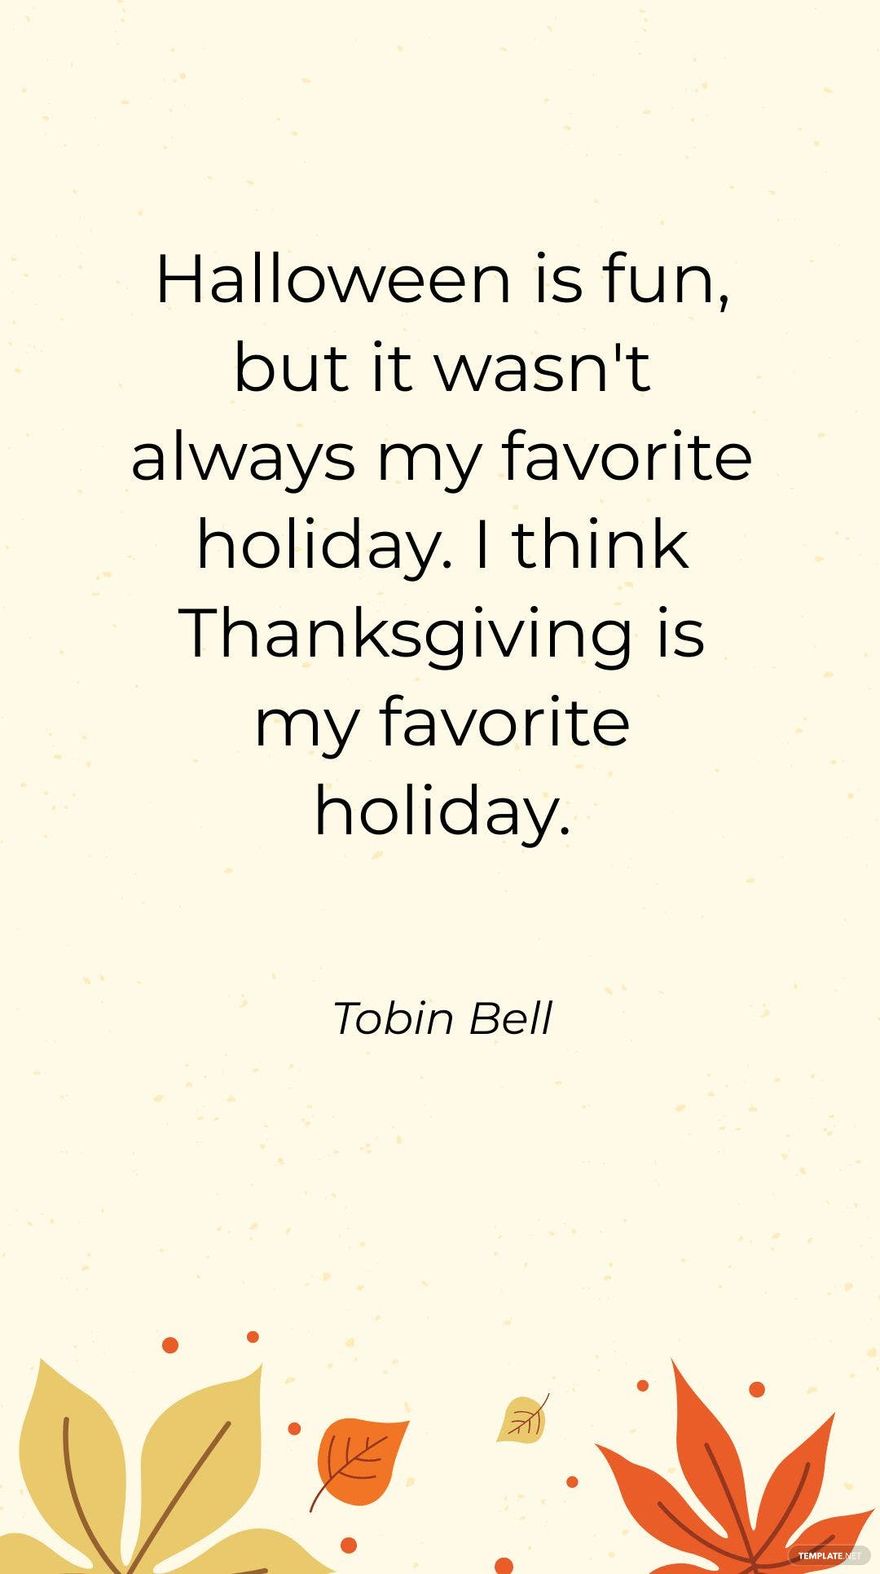 Tobin Bell - Halloween is fun, but it wasn't always my favorite holiday. I think Thanksgiving is my favorite holiday.